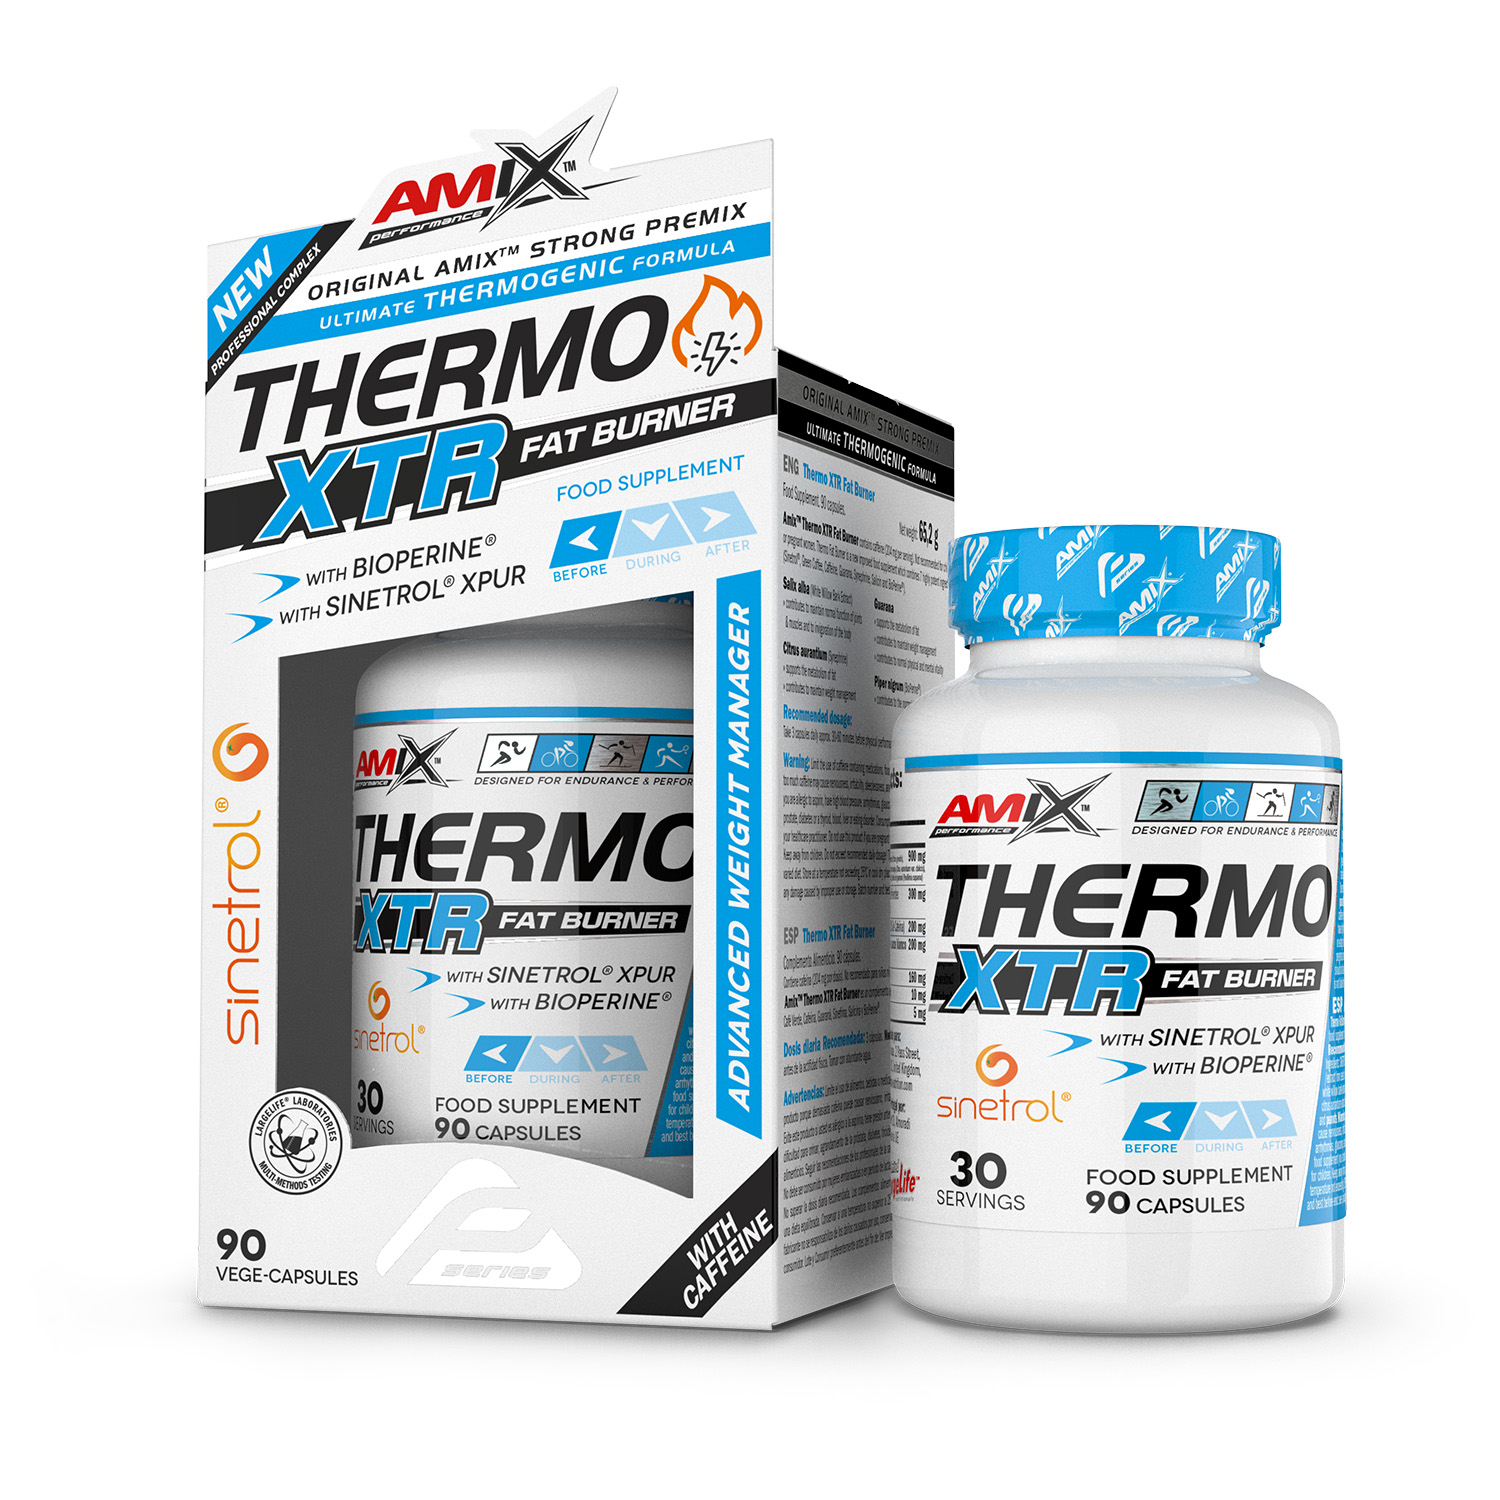 Amix Thermo XTR Fat Burner, 90cps